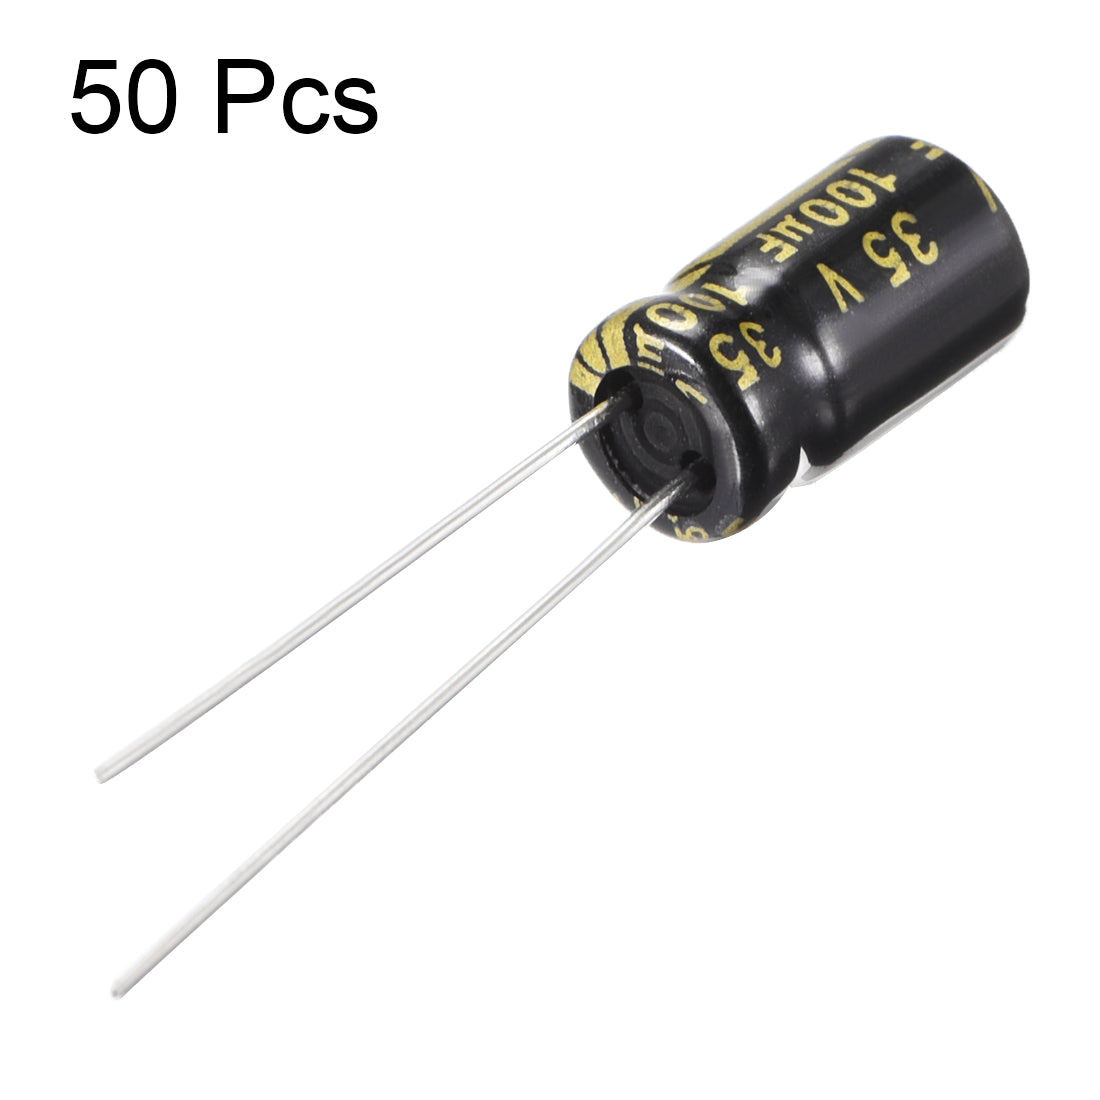 uxcell Uxcell Aluminum Radial Electrolytic Capacitor with 100uF 35V 105 Celsius Life 2000H 6.3 x 11 mm Black 50pcs